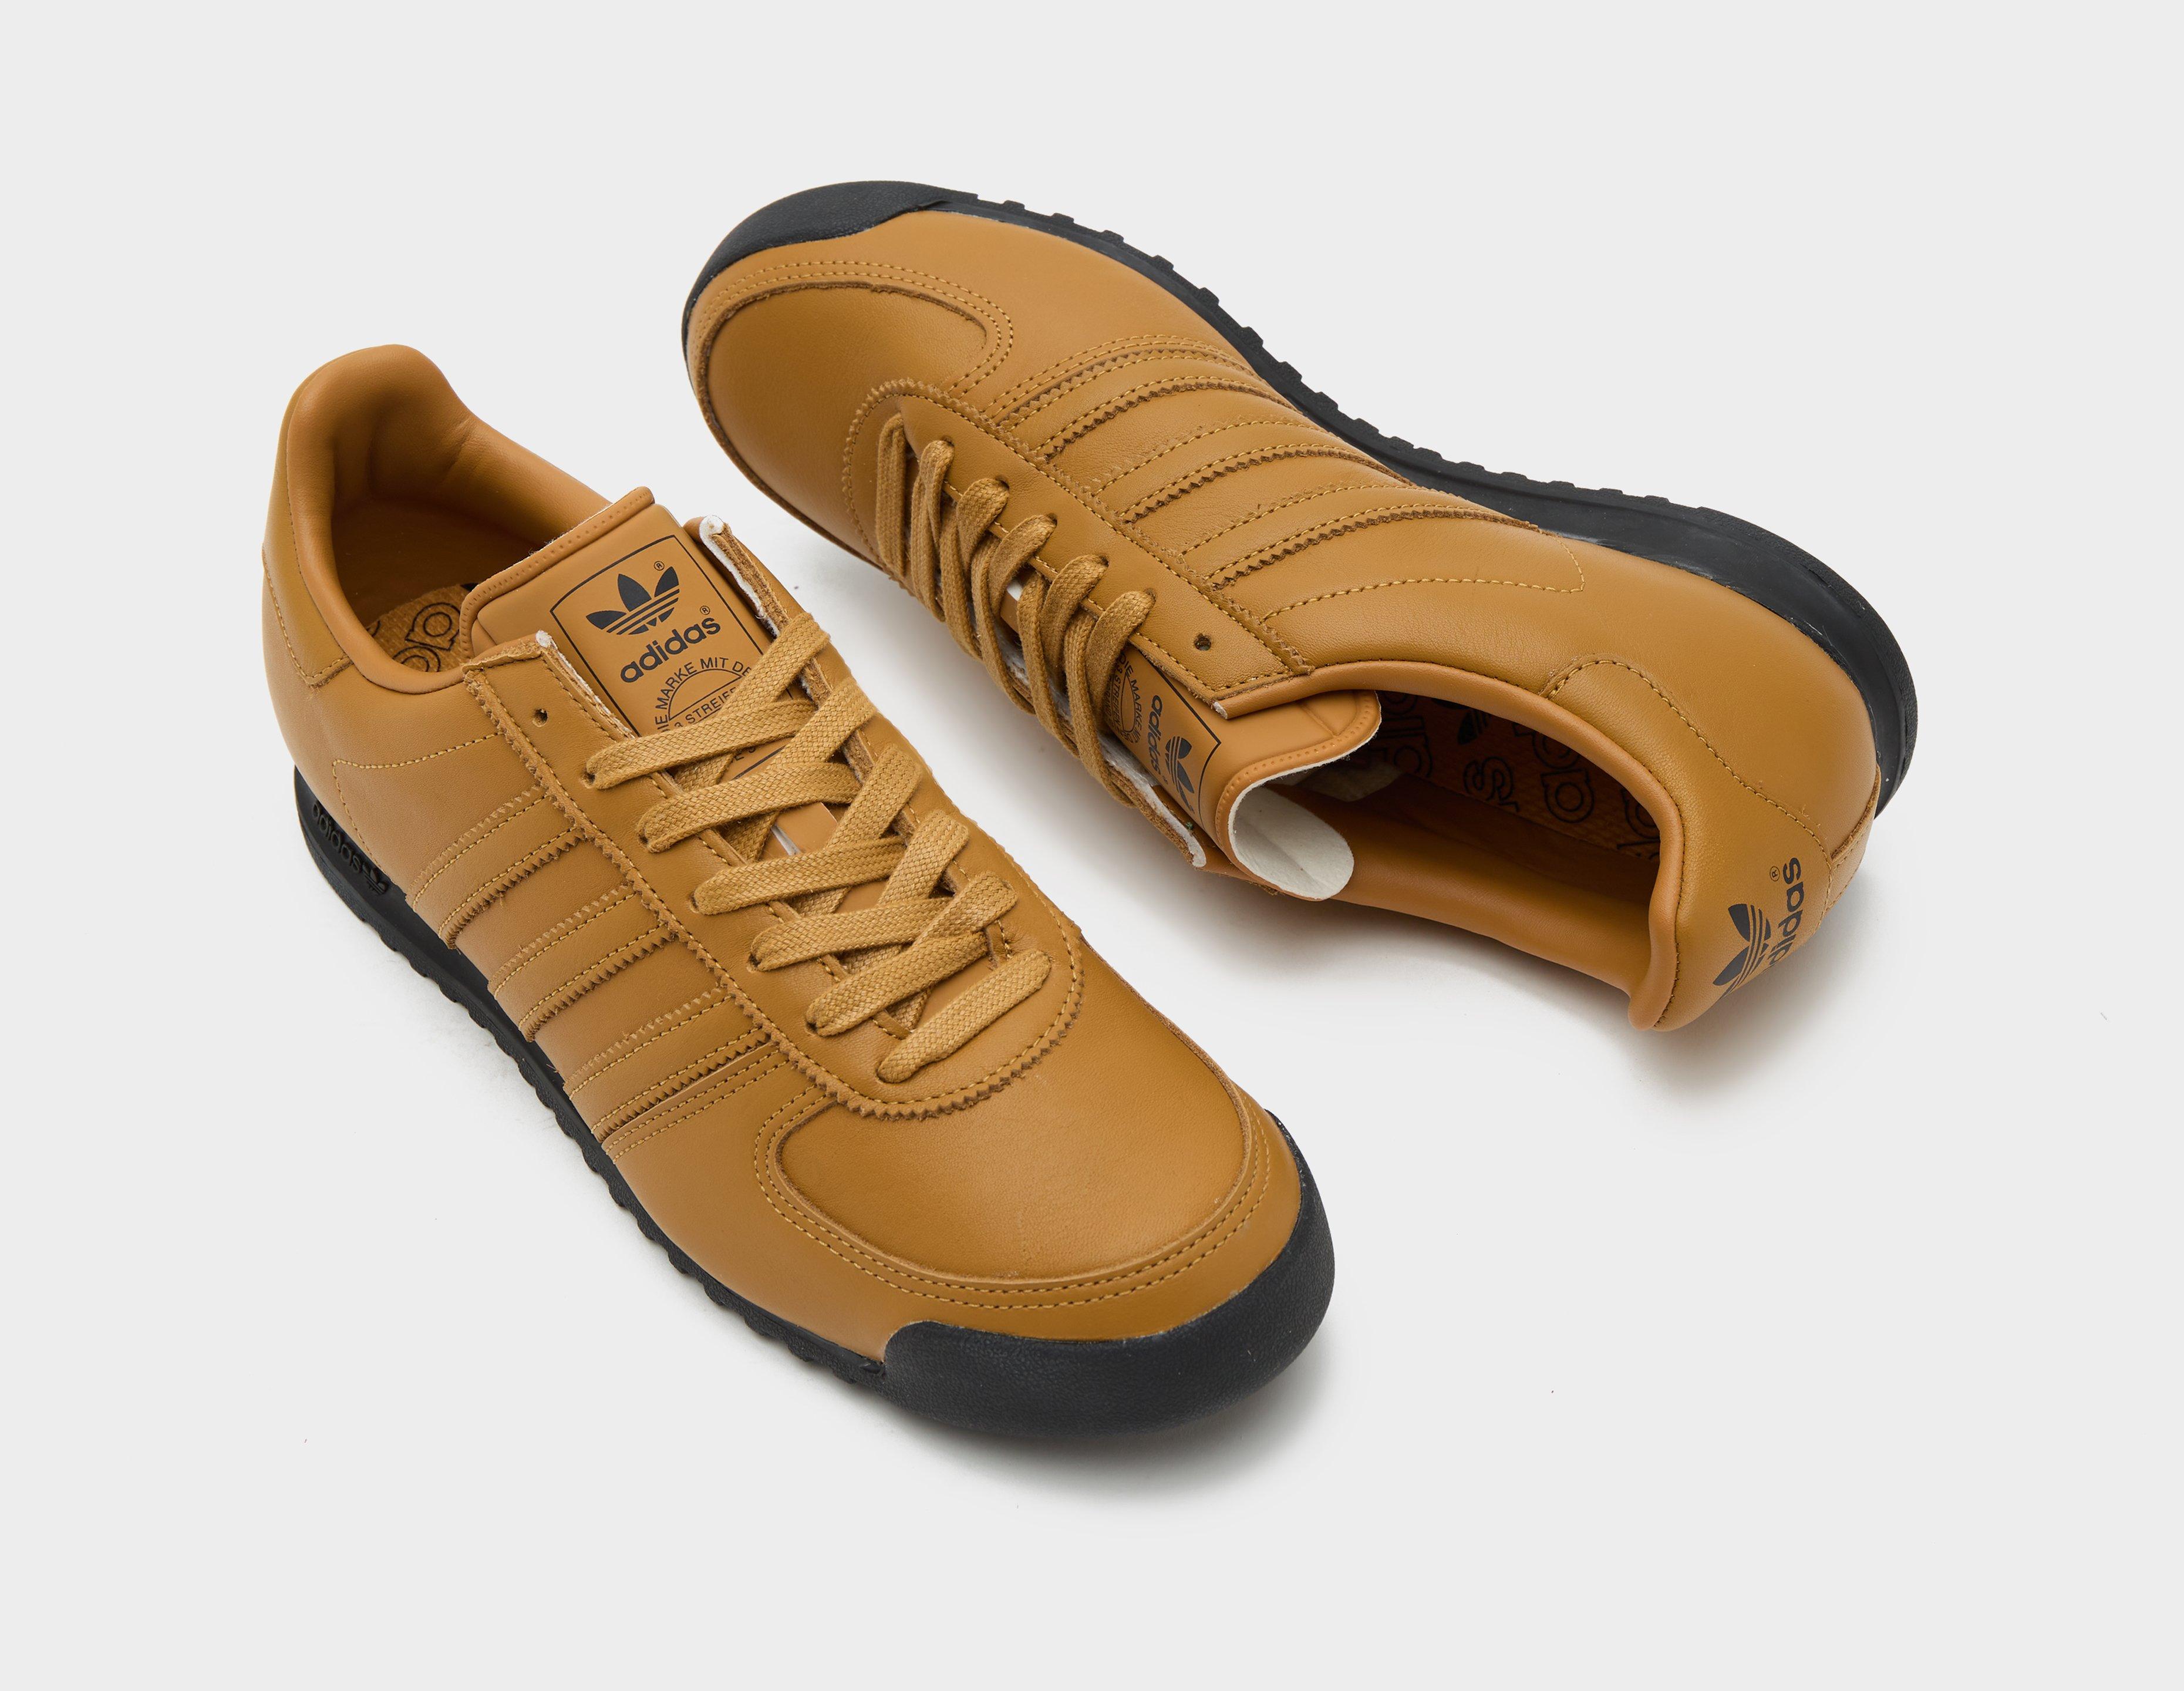 adidas | exclusive and Archive sale Women\'s Healthdesign? brands shoes Originals Team women for puma - - adidas All Brown dress dress